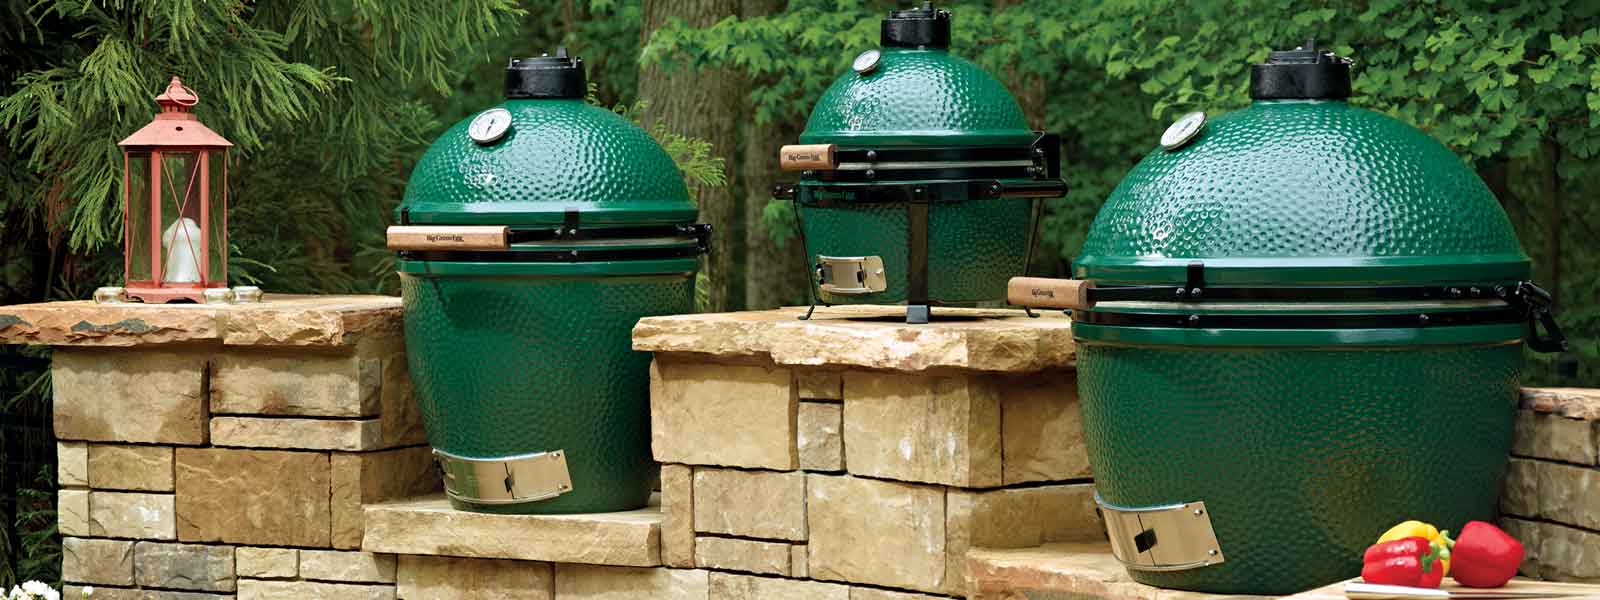 BGE small deck group